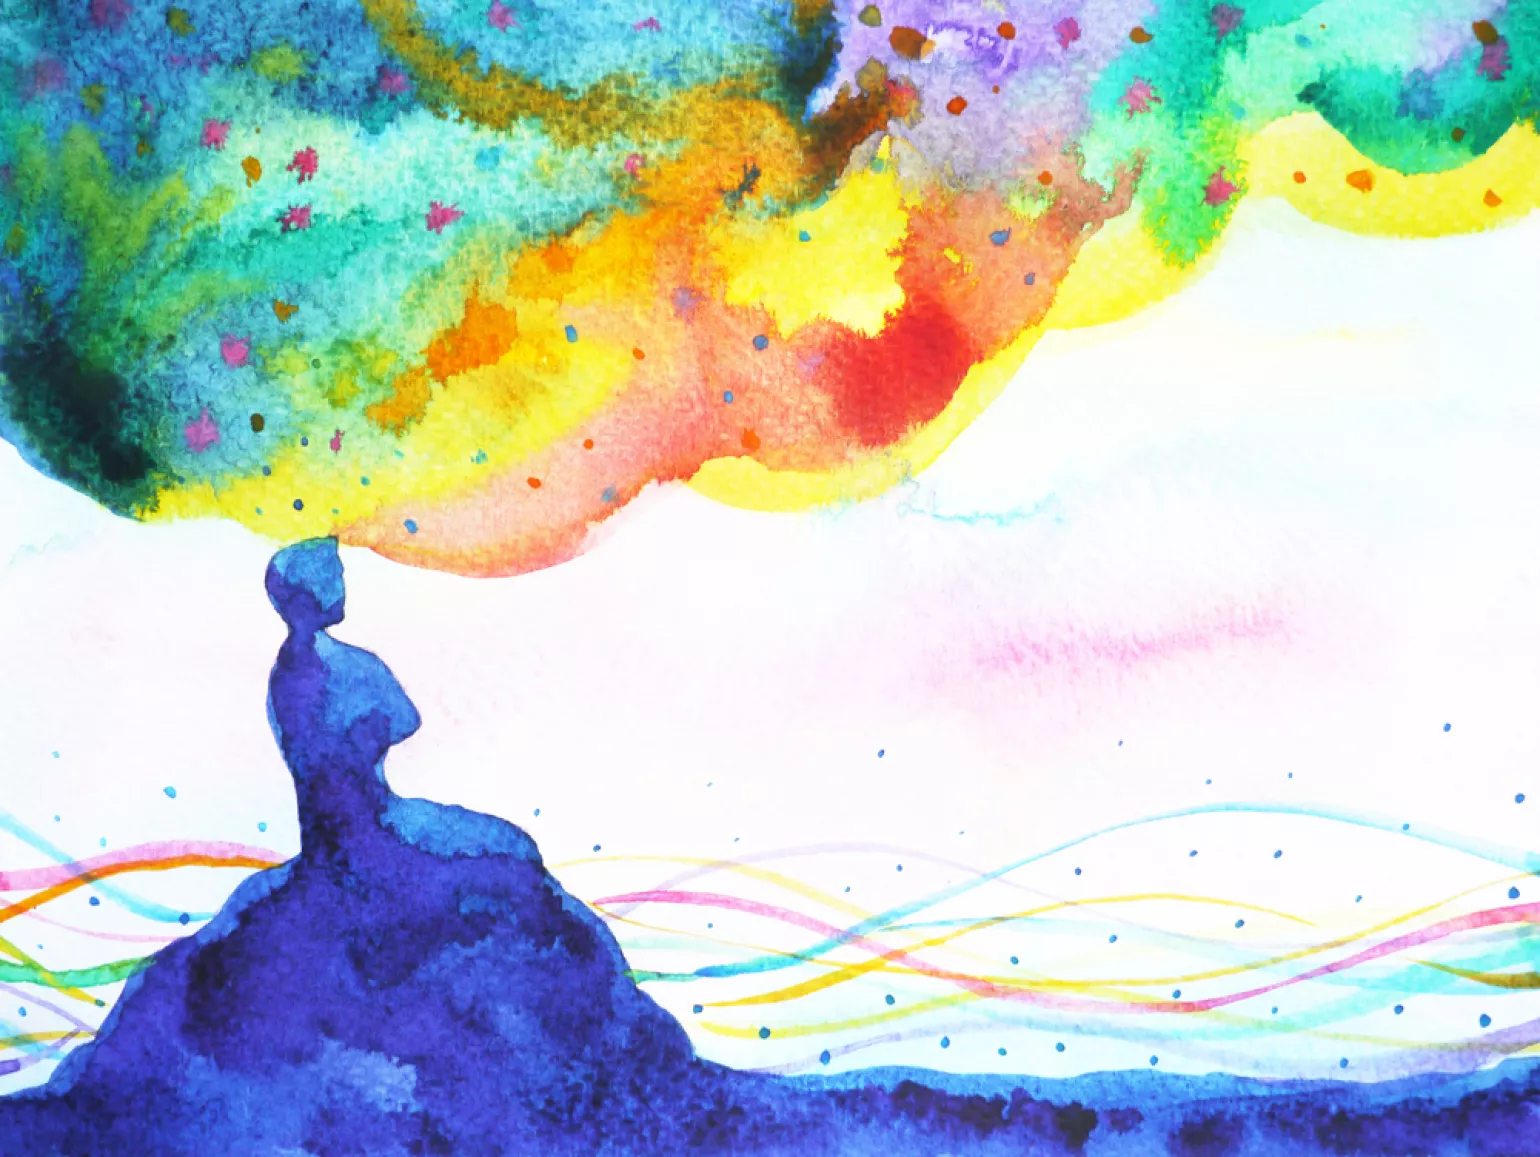 Abstract watercolor painting of a person thinking, rainbow colors